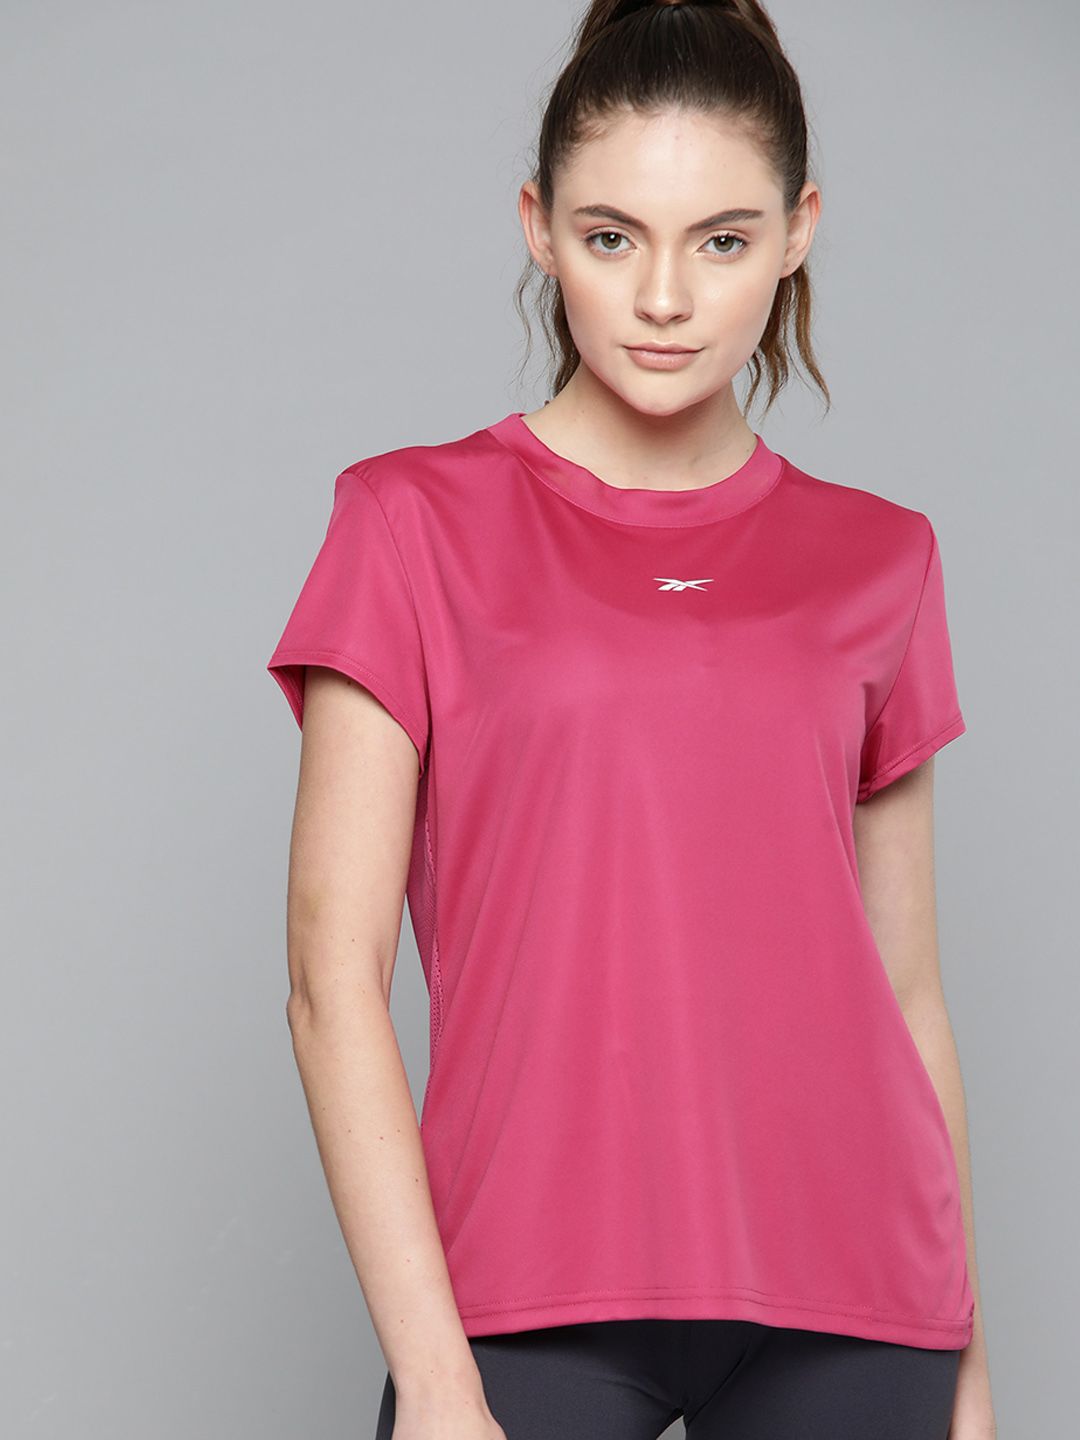 Reebok Women Pink Commercial Solid Workout T-Shirt Price in India